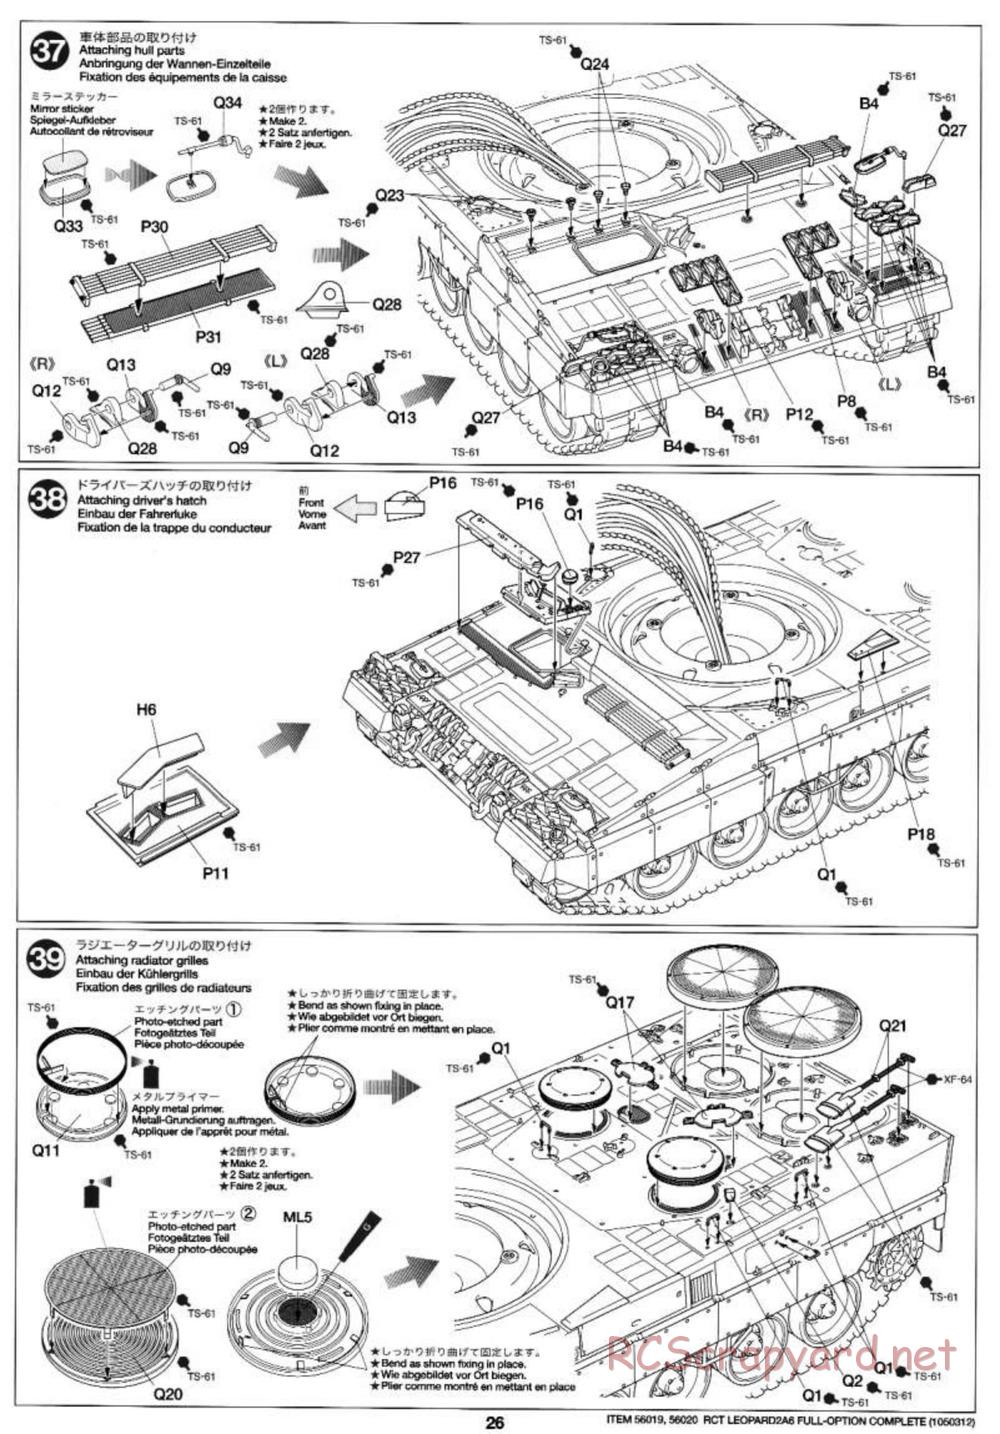 Tamiya - Leopard 2 A6 - 1/16 Scale Chassis - Manual - Page 26